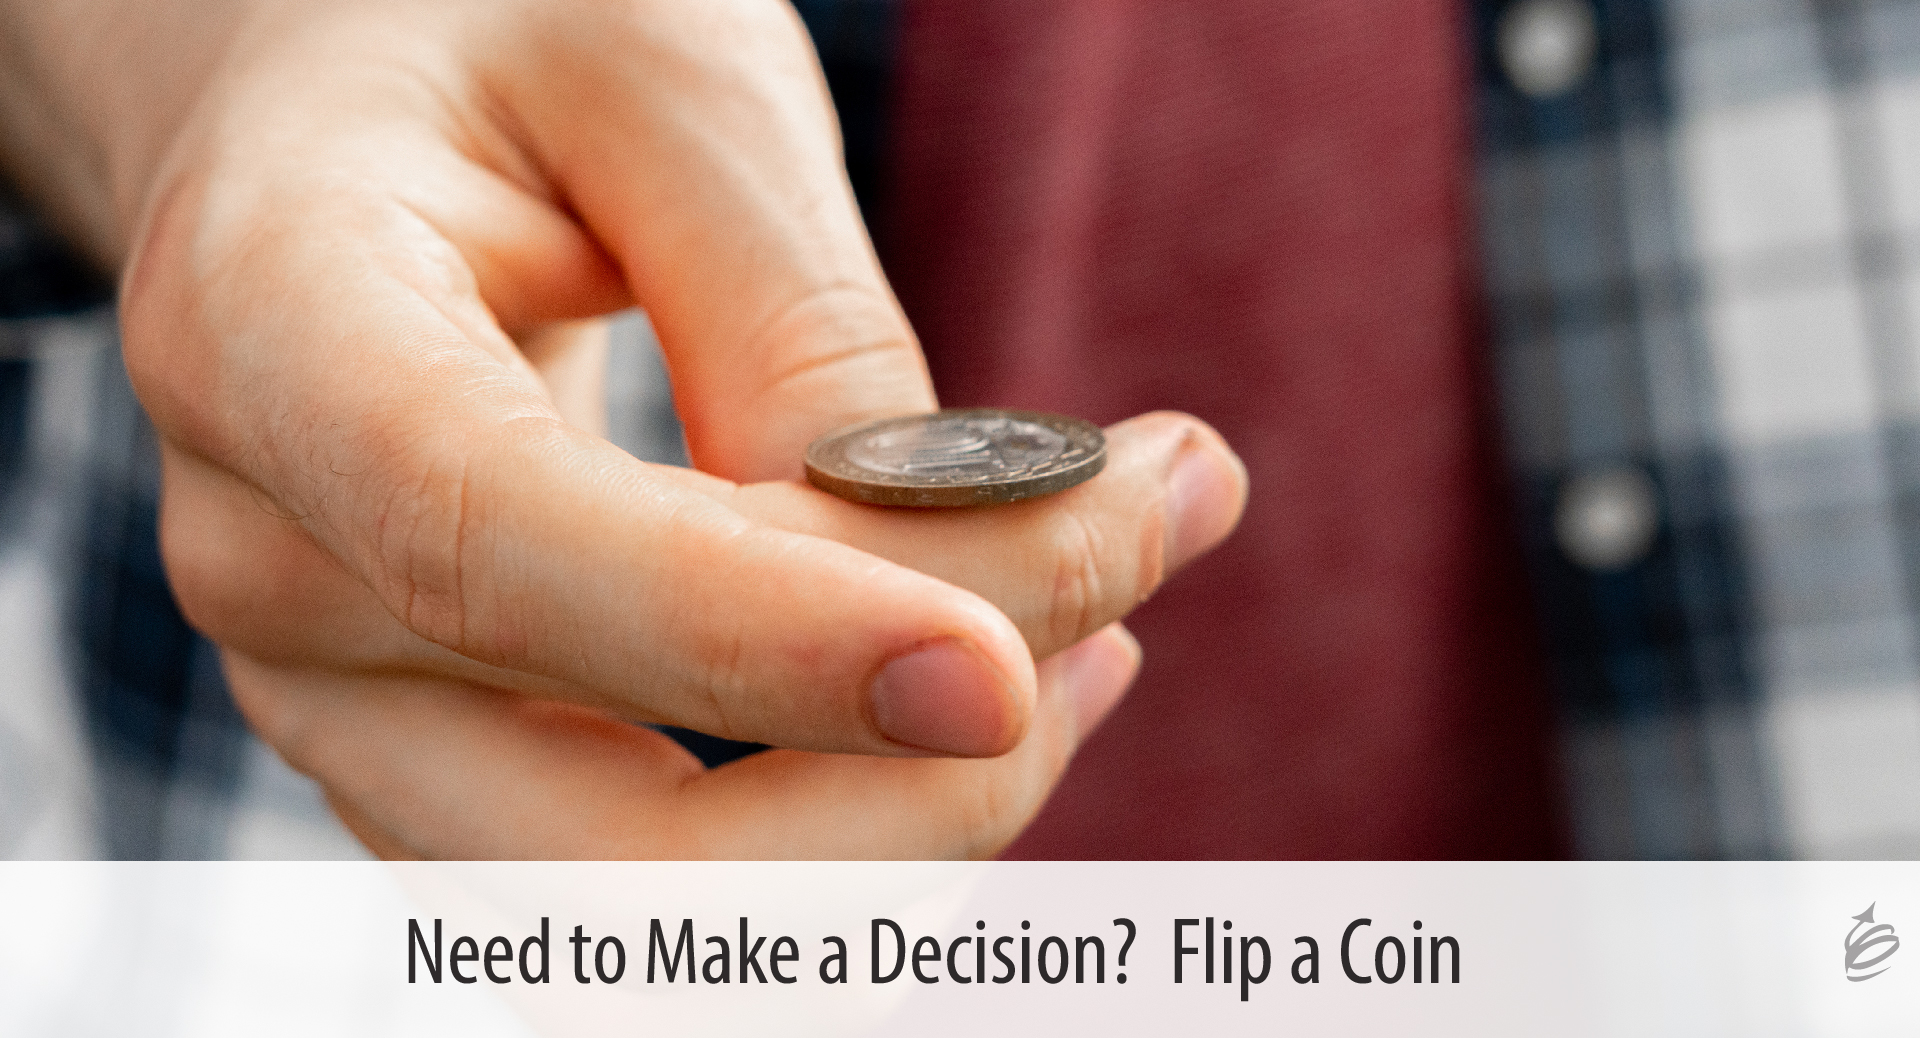 Heads or Tails: The Impact of a Coin Toss on Major Life Decisions and Subsequent Happiness | NBER